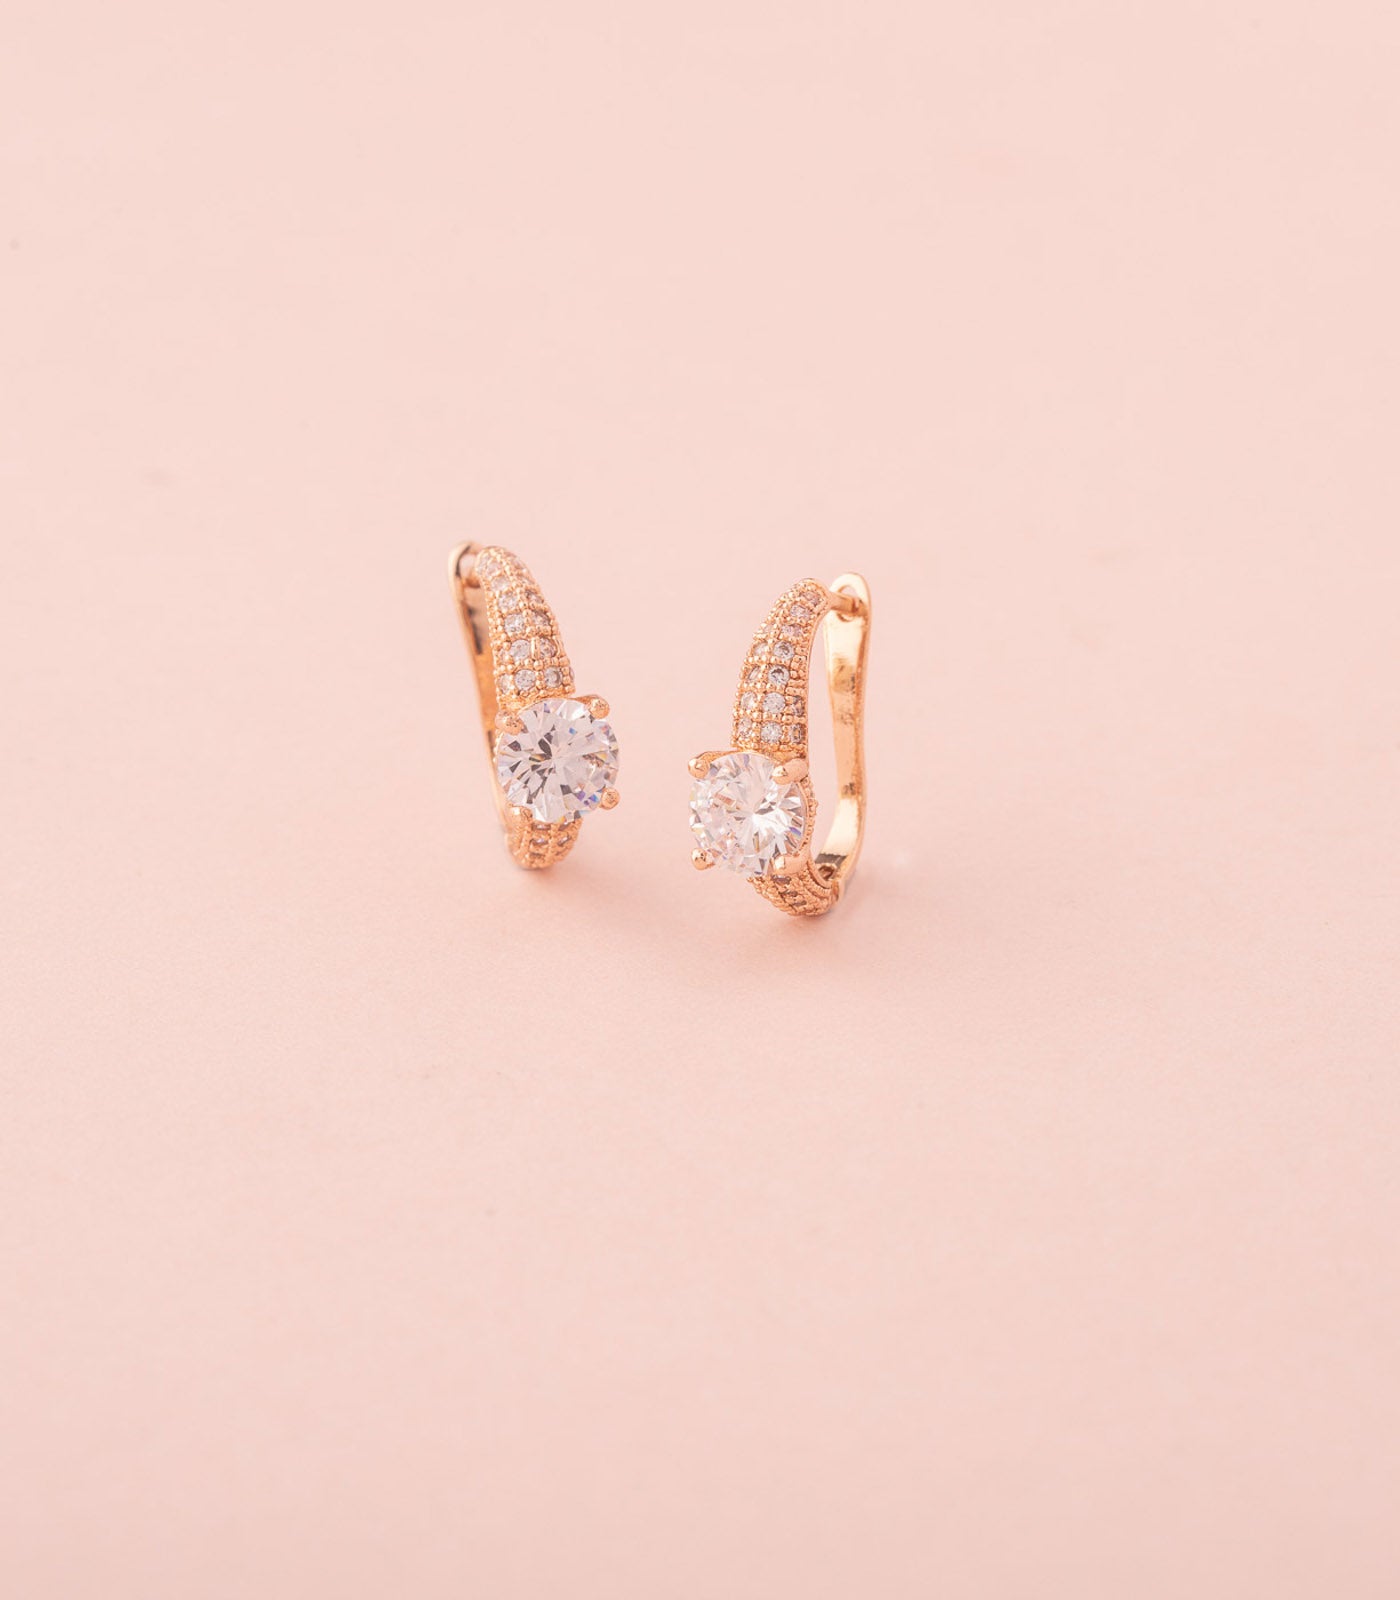 Scintillating Stone Studs - Golden Color Earrings (Brass)